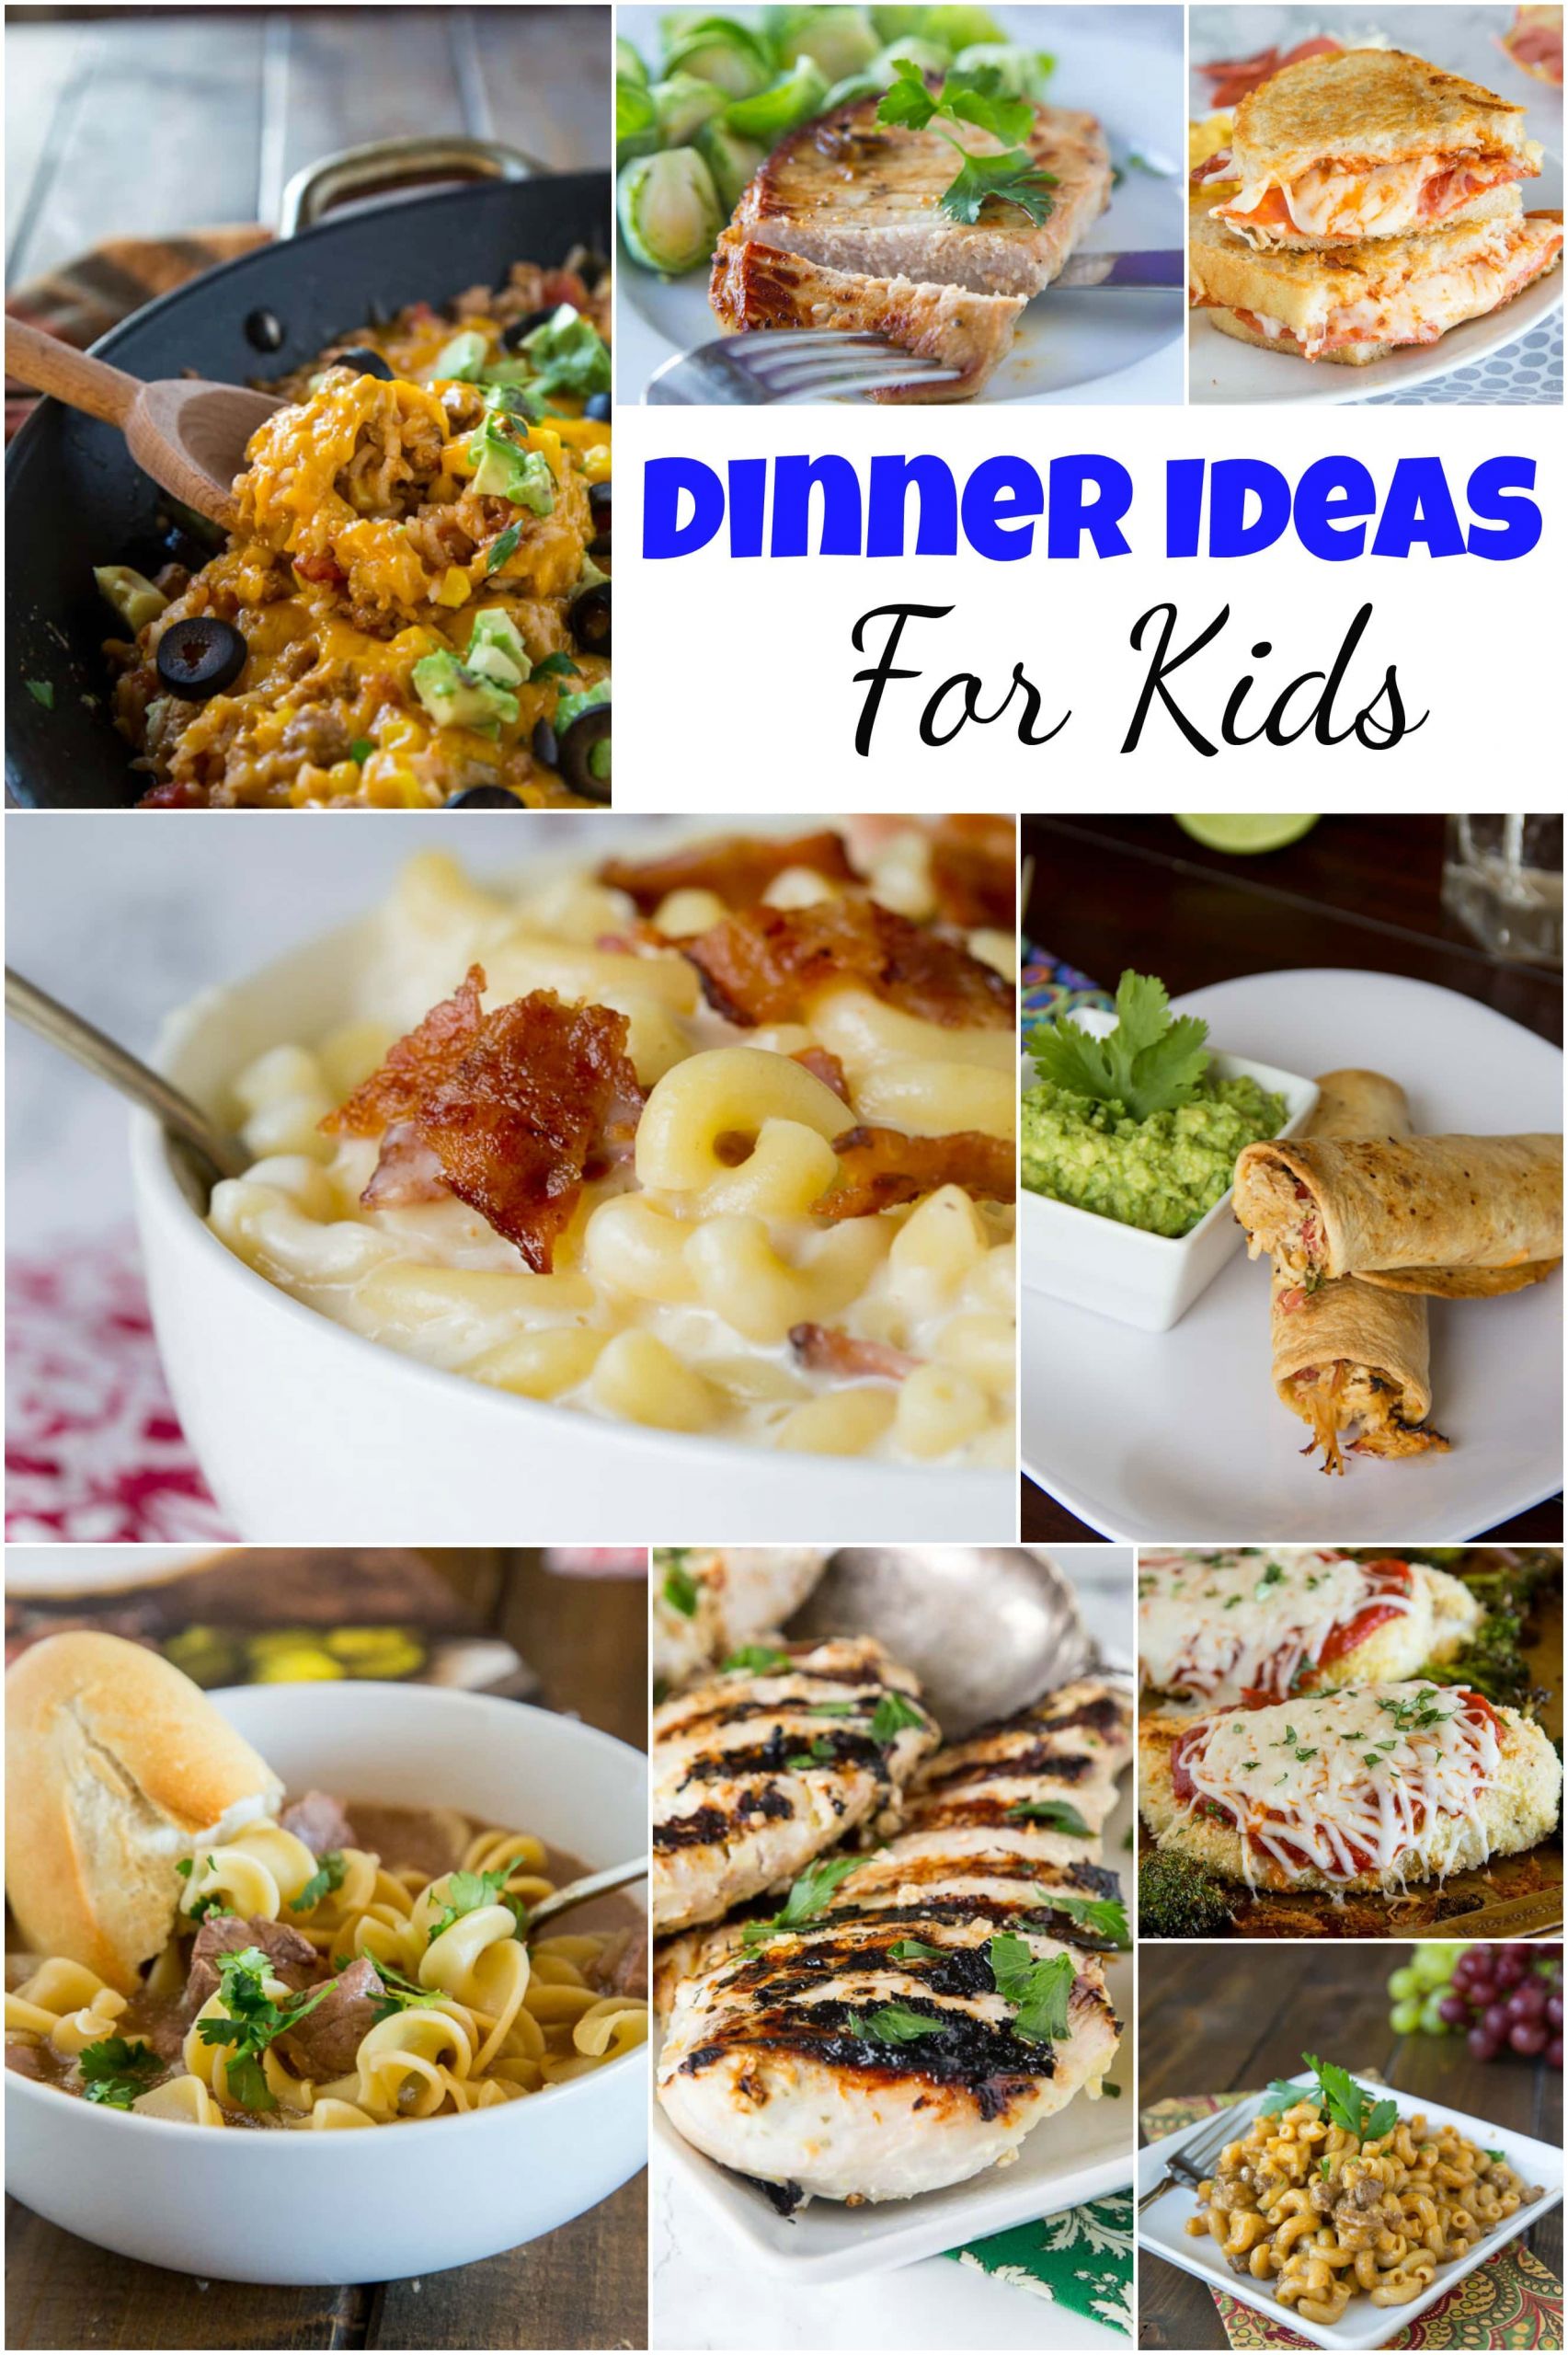 Kids Dinner Receipes New Dinner Ideas for Kids Dinners Dishes and Desserts